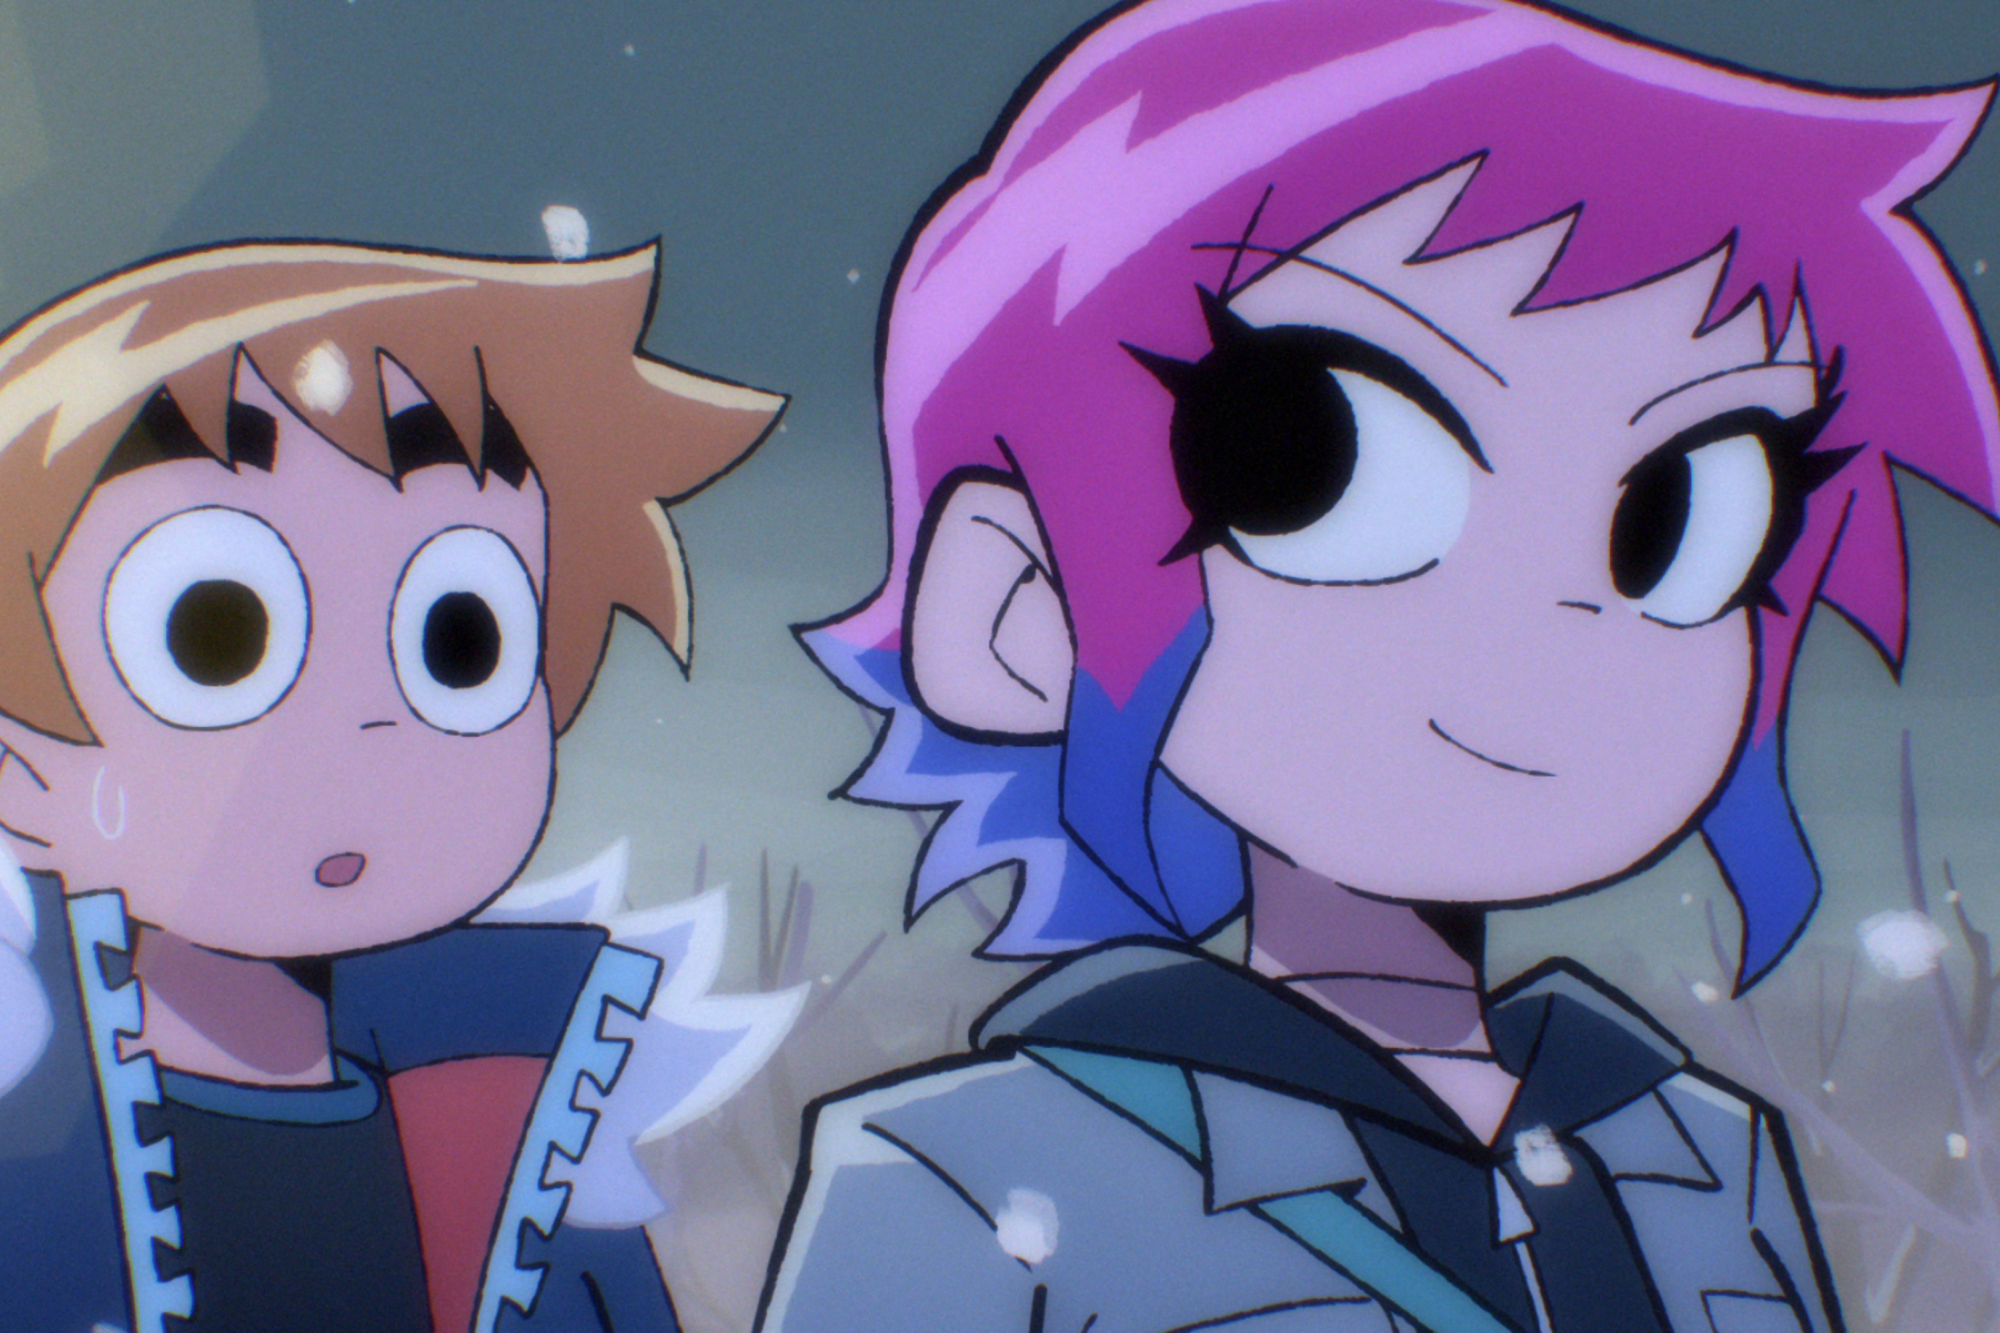 Illustrations of Scott Pilgrim and Ramona Flowers in cold weather.